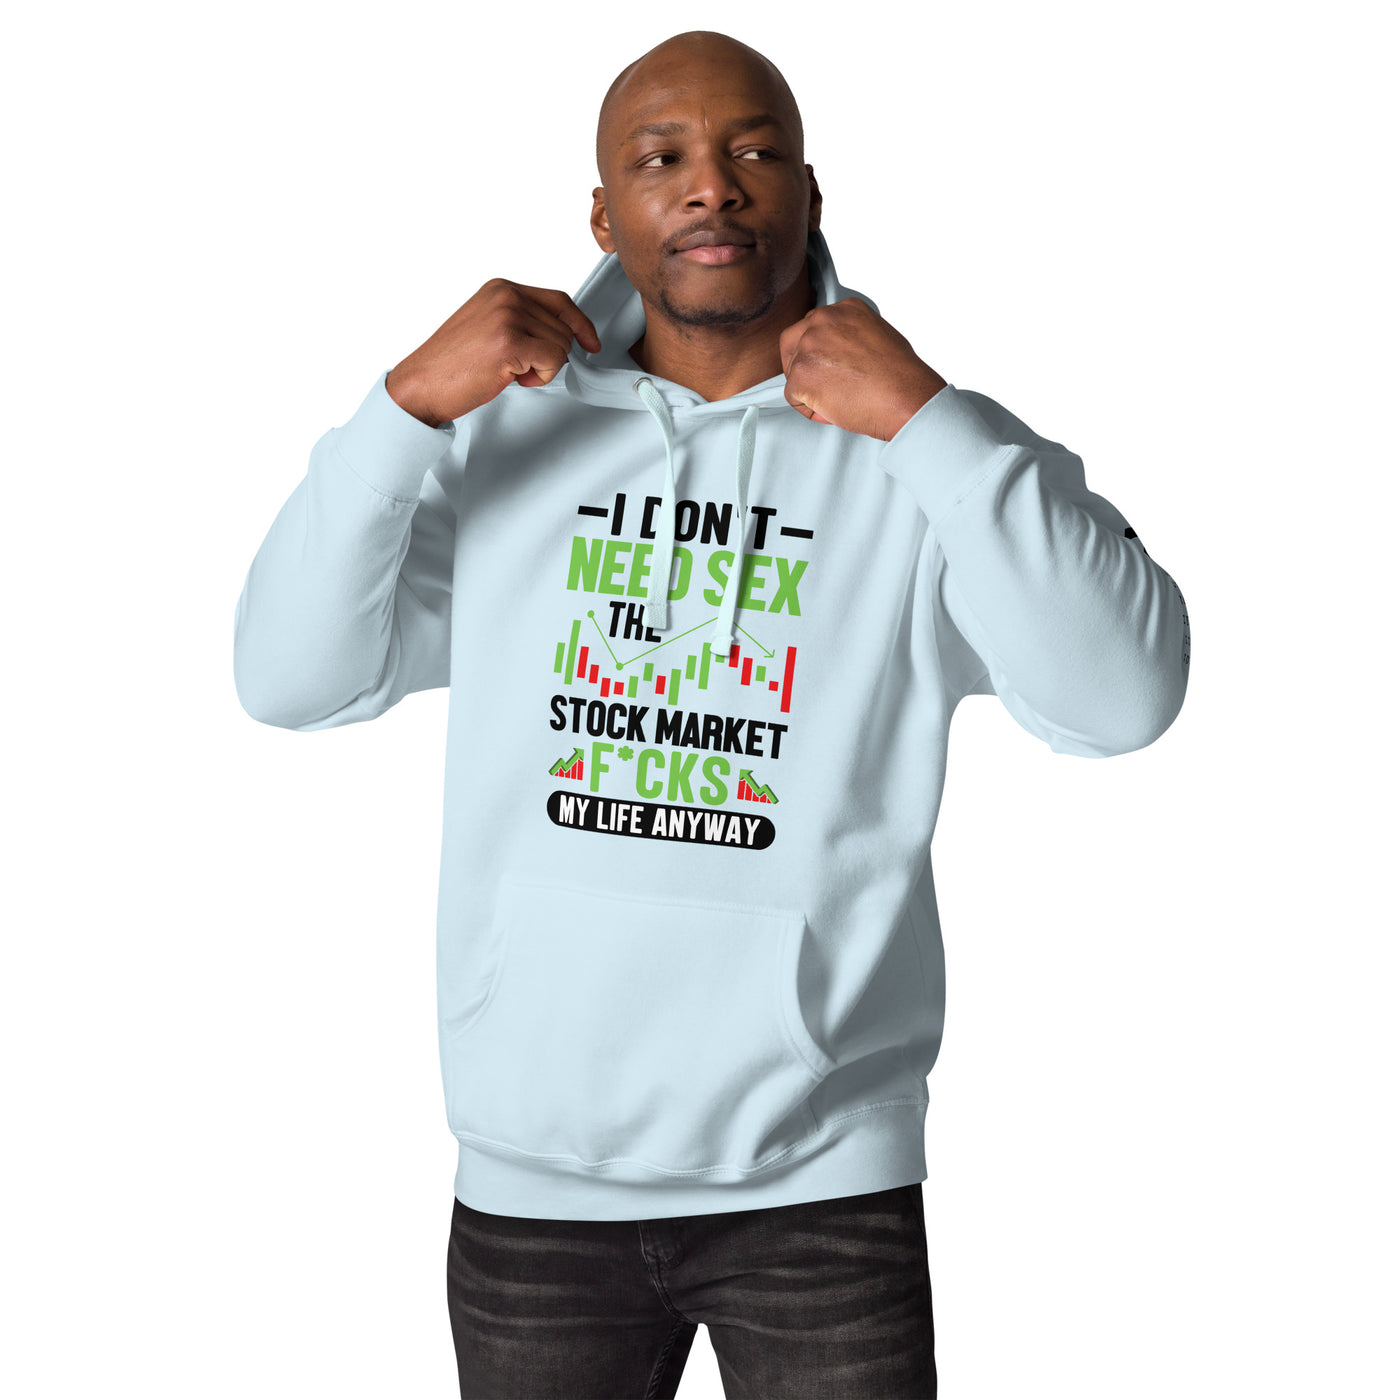 I don't Need sex, the Stock Market Fucks my life anyway in Dark Text - Unisex Hoodie